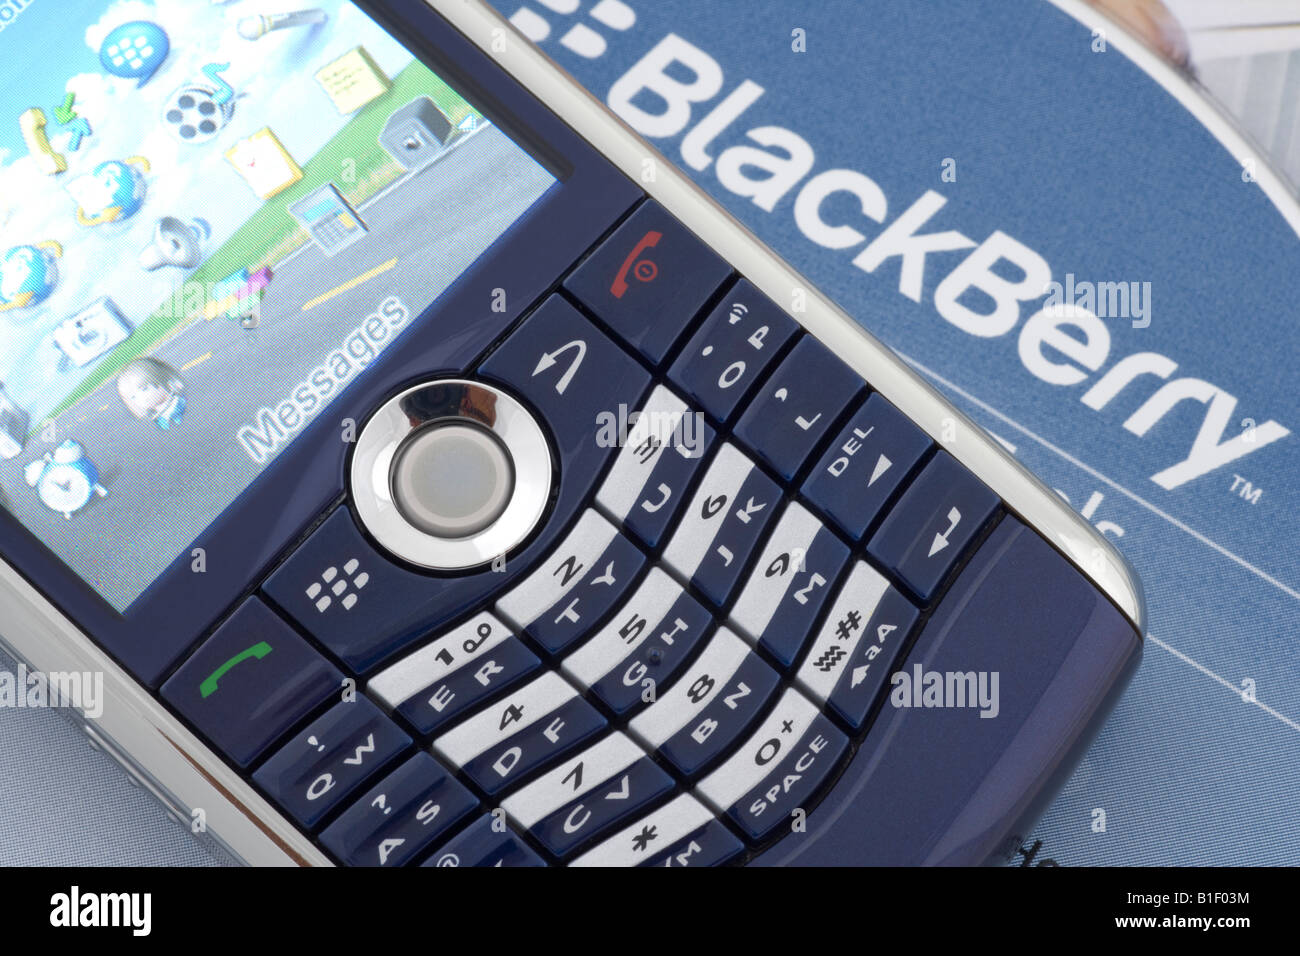 Close up photograph of mobile phone qwerty key keyboard Blackberry smartphone Stock Photo